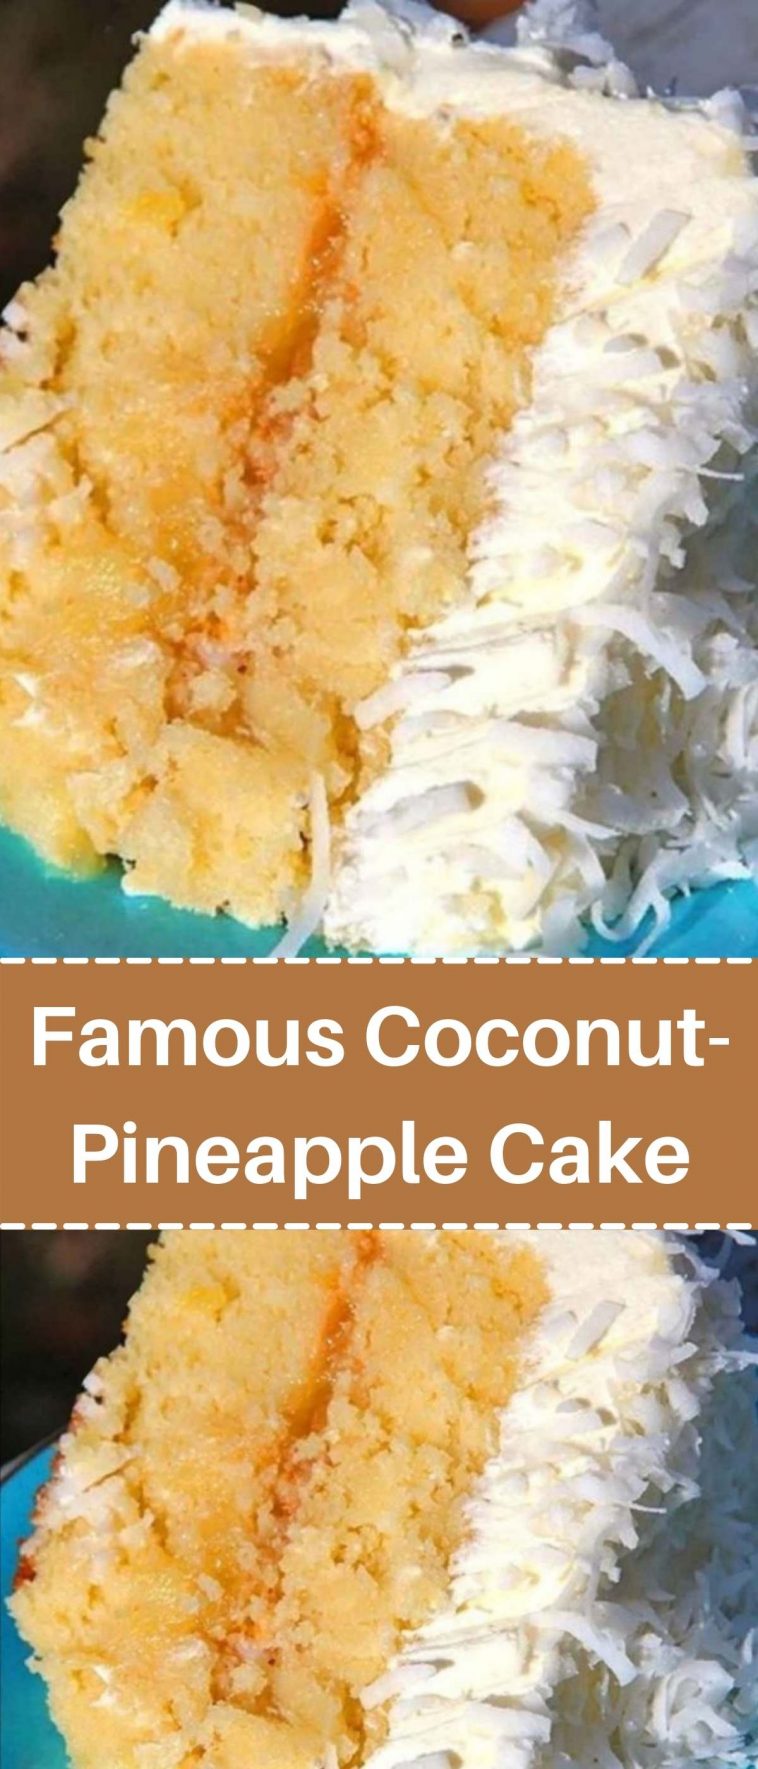 Famous Coconut-Pineapple Cake